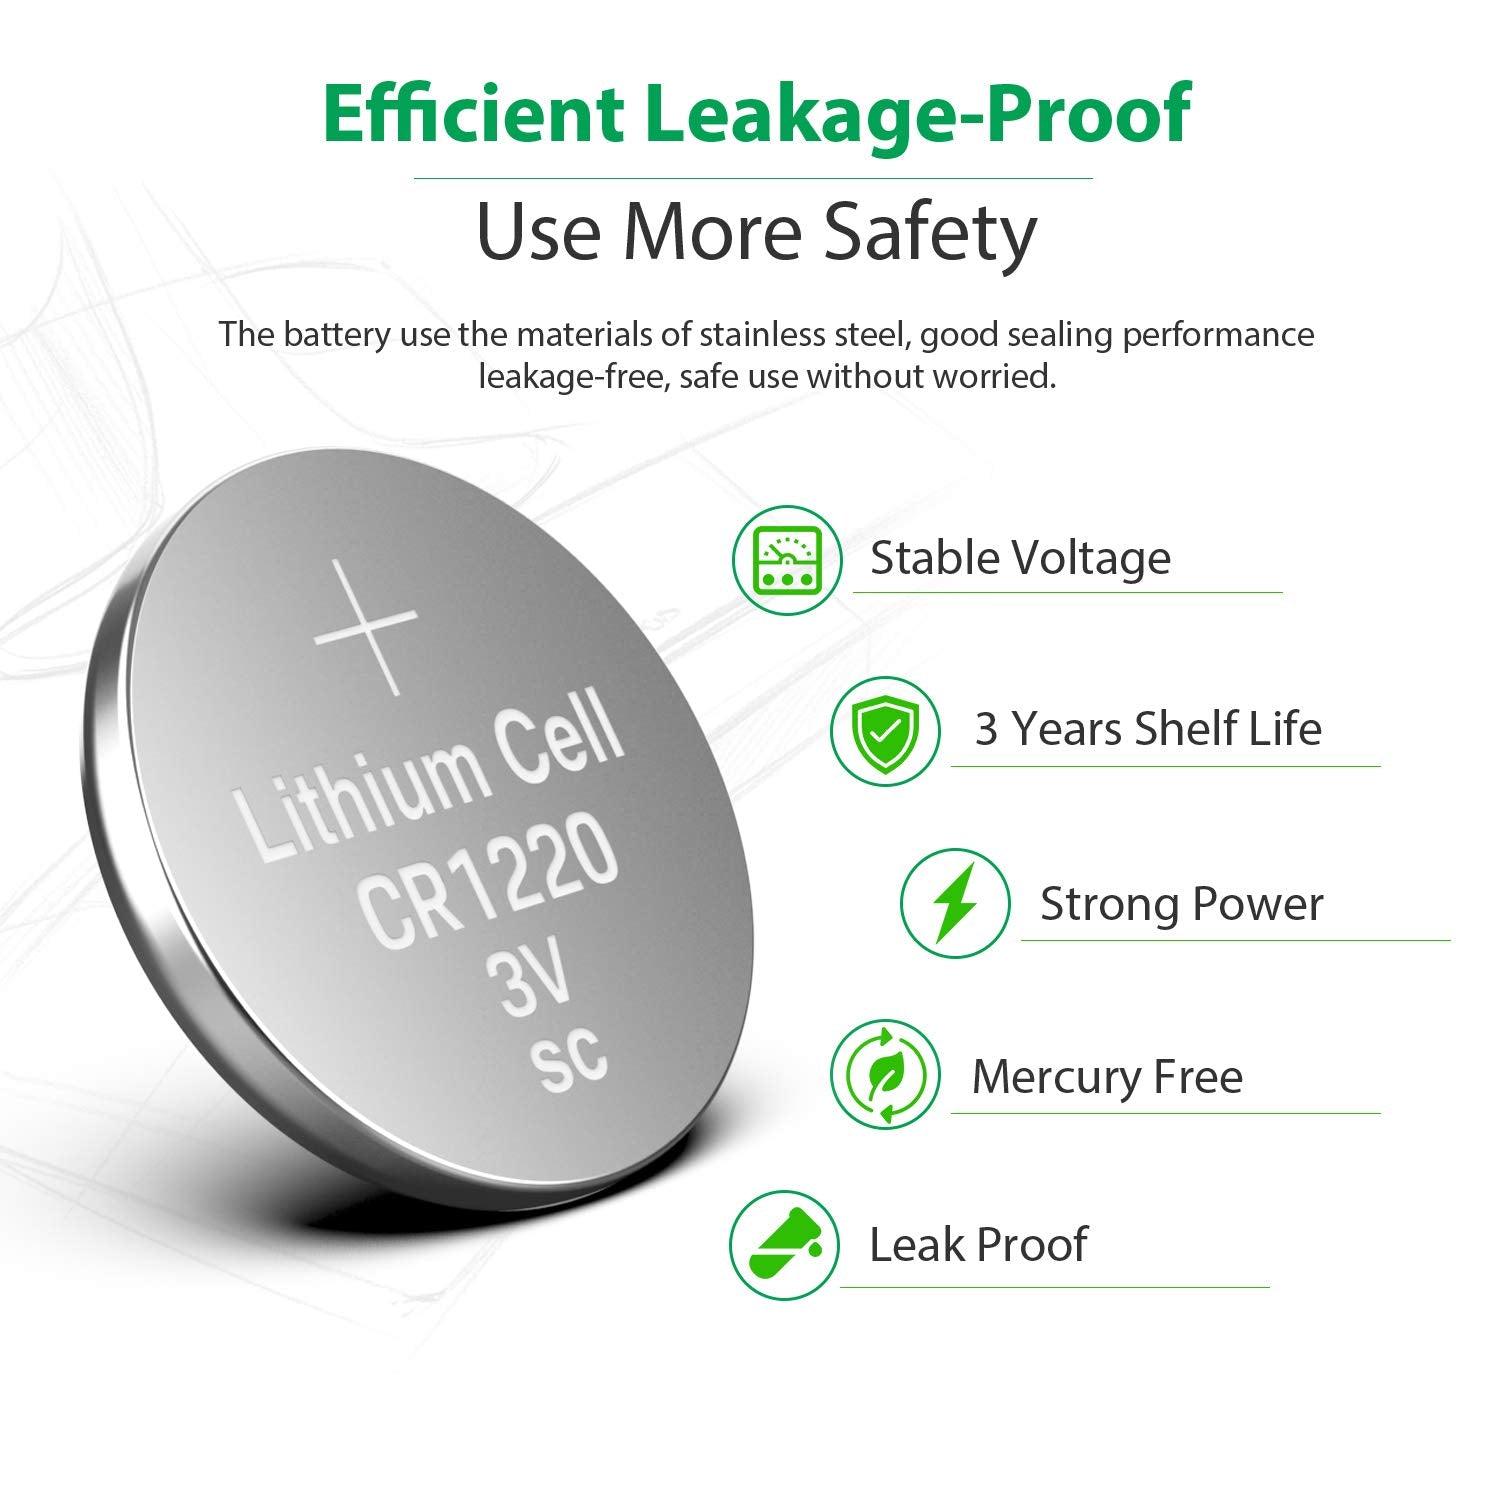 LiCB CR1220 Battery 3V Lithium 5PCS (CR 1220 / Batteries CR1220 / DL1220 / ECR1220) for watches,Remotes,LED lights,electronic devices,Toys,Car key,Scales.